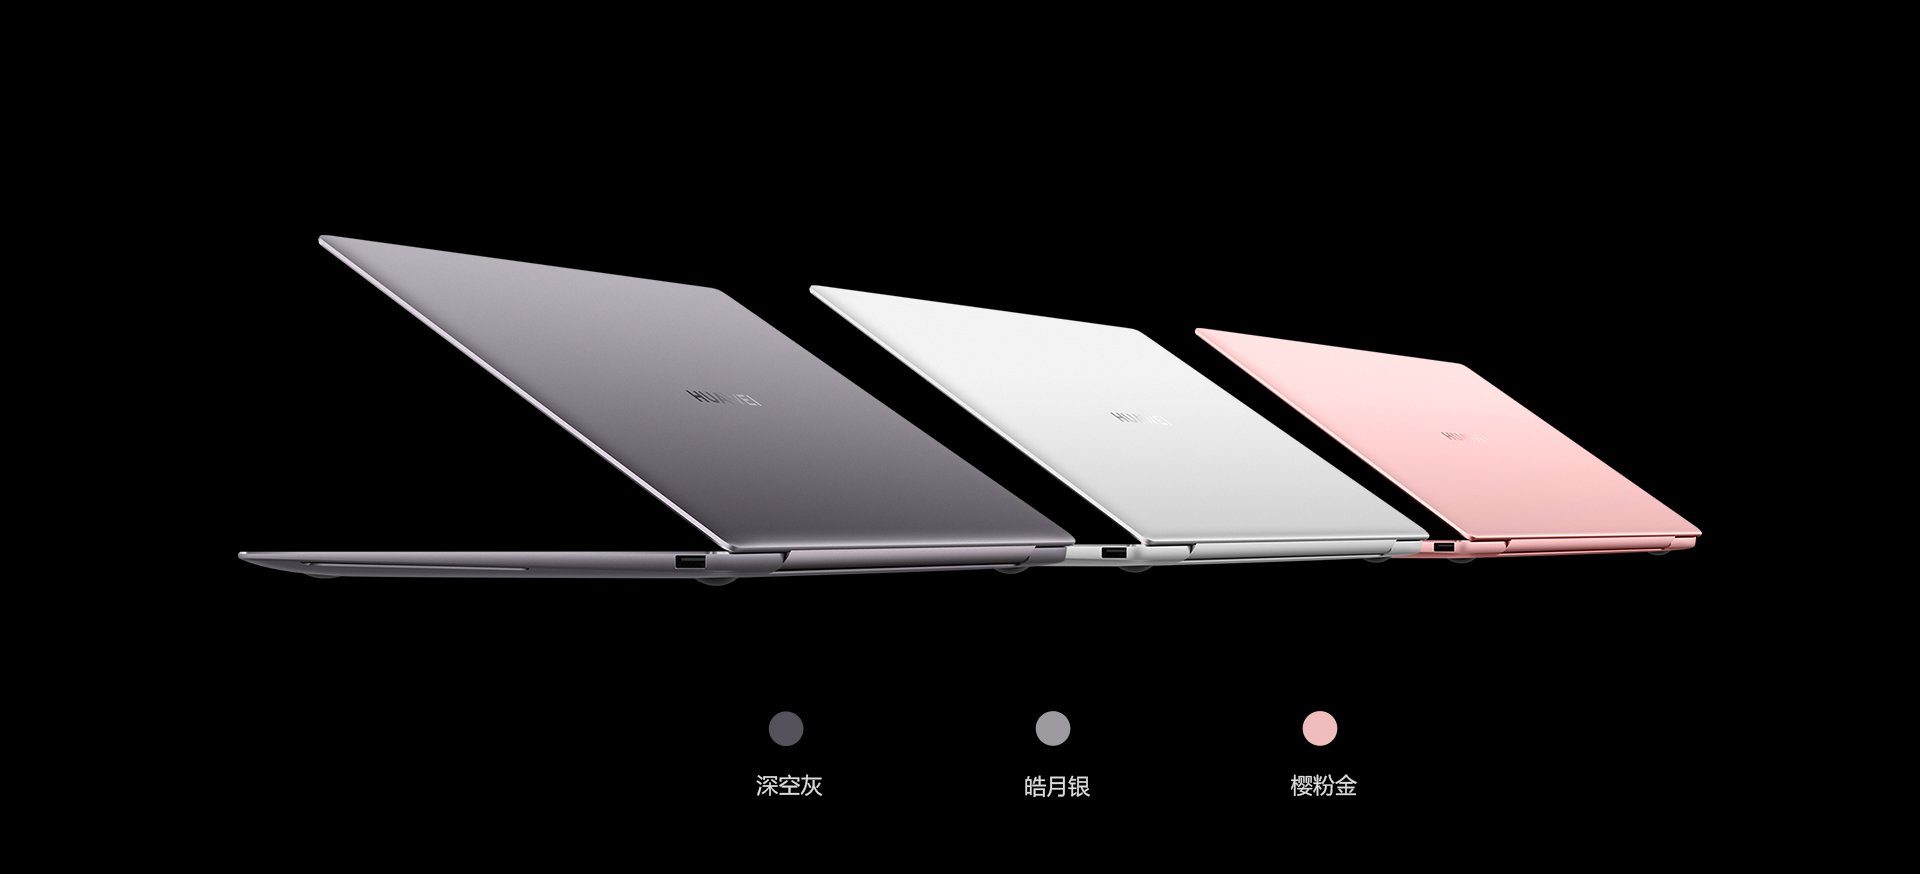 Huawei MateBook X Pro (2019) all colors